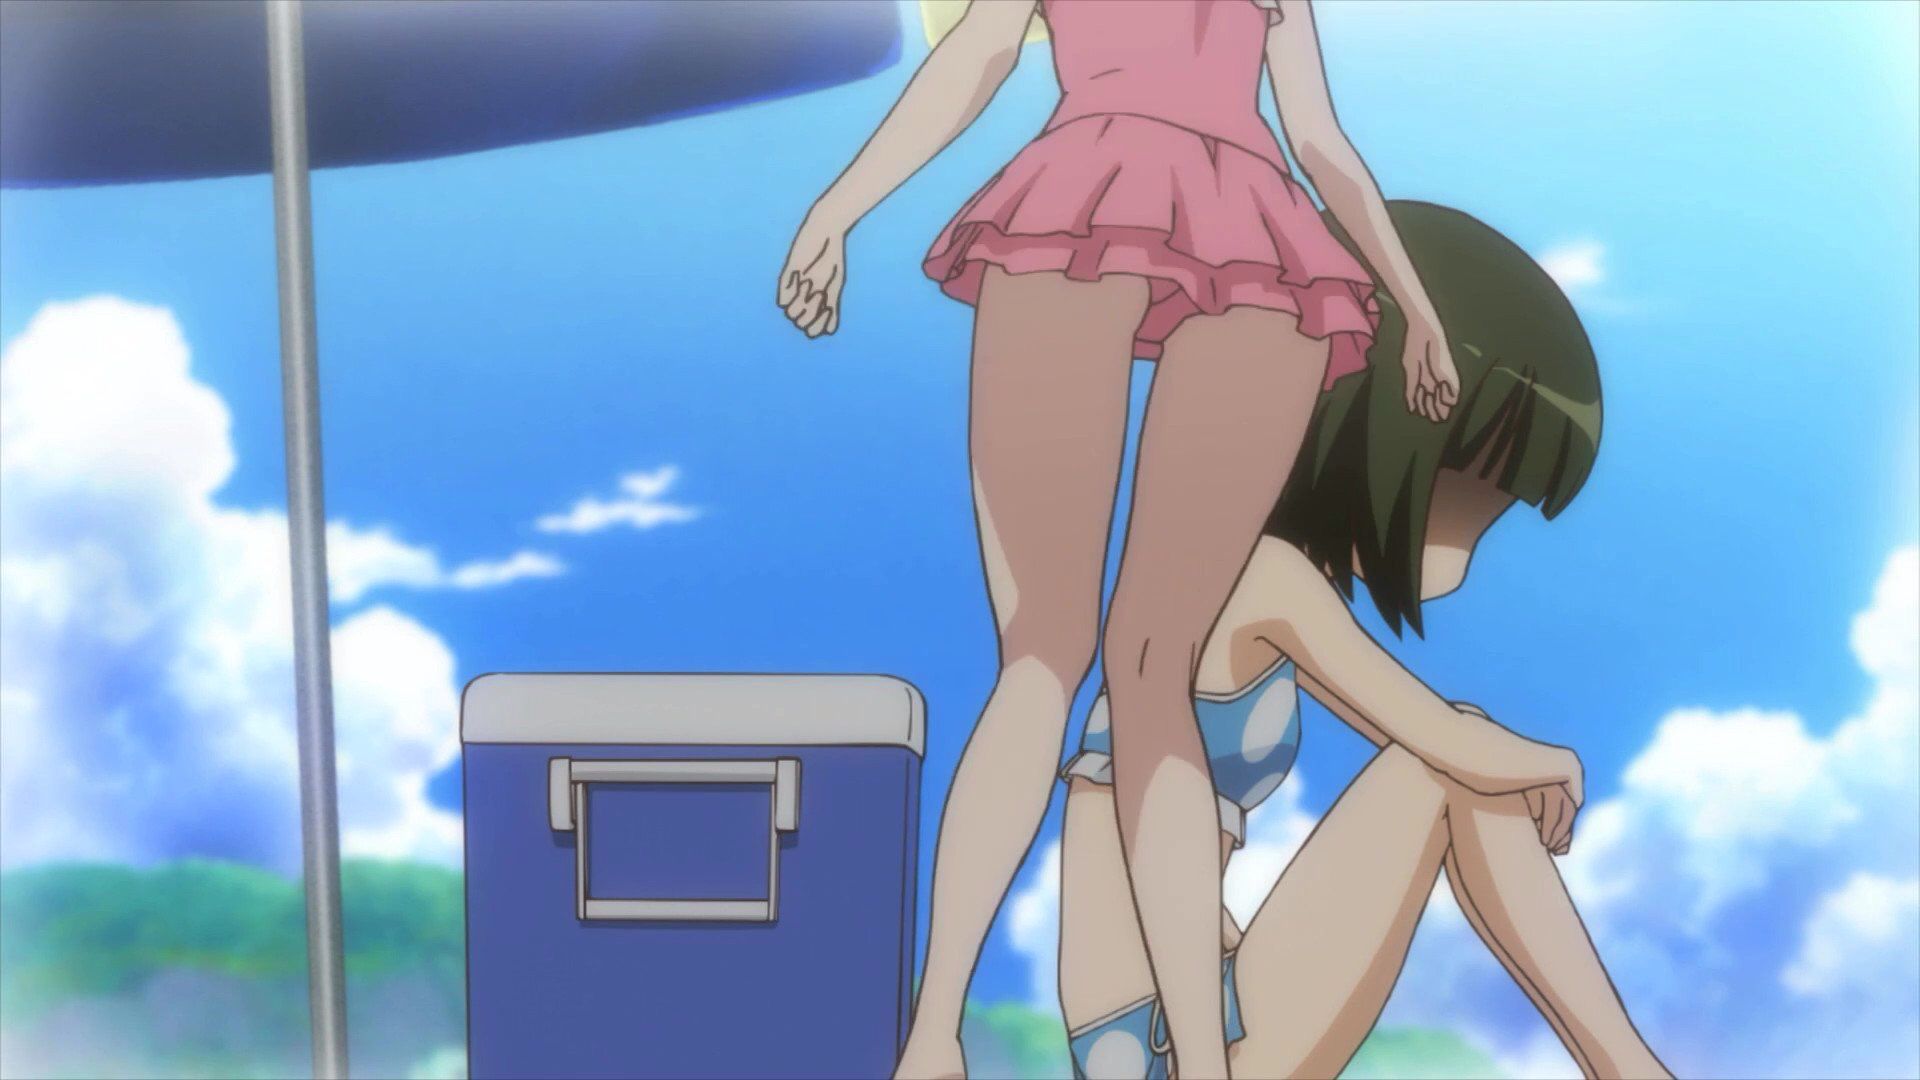 Images of two-dimensional pretty legs just focus on character corner wwwwwwwwww 22